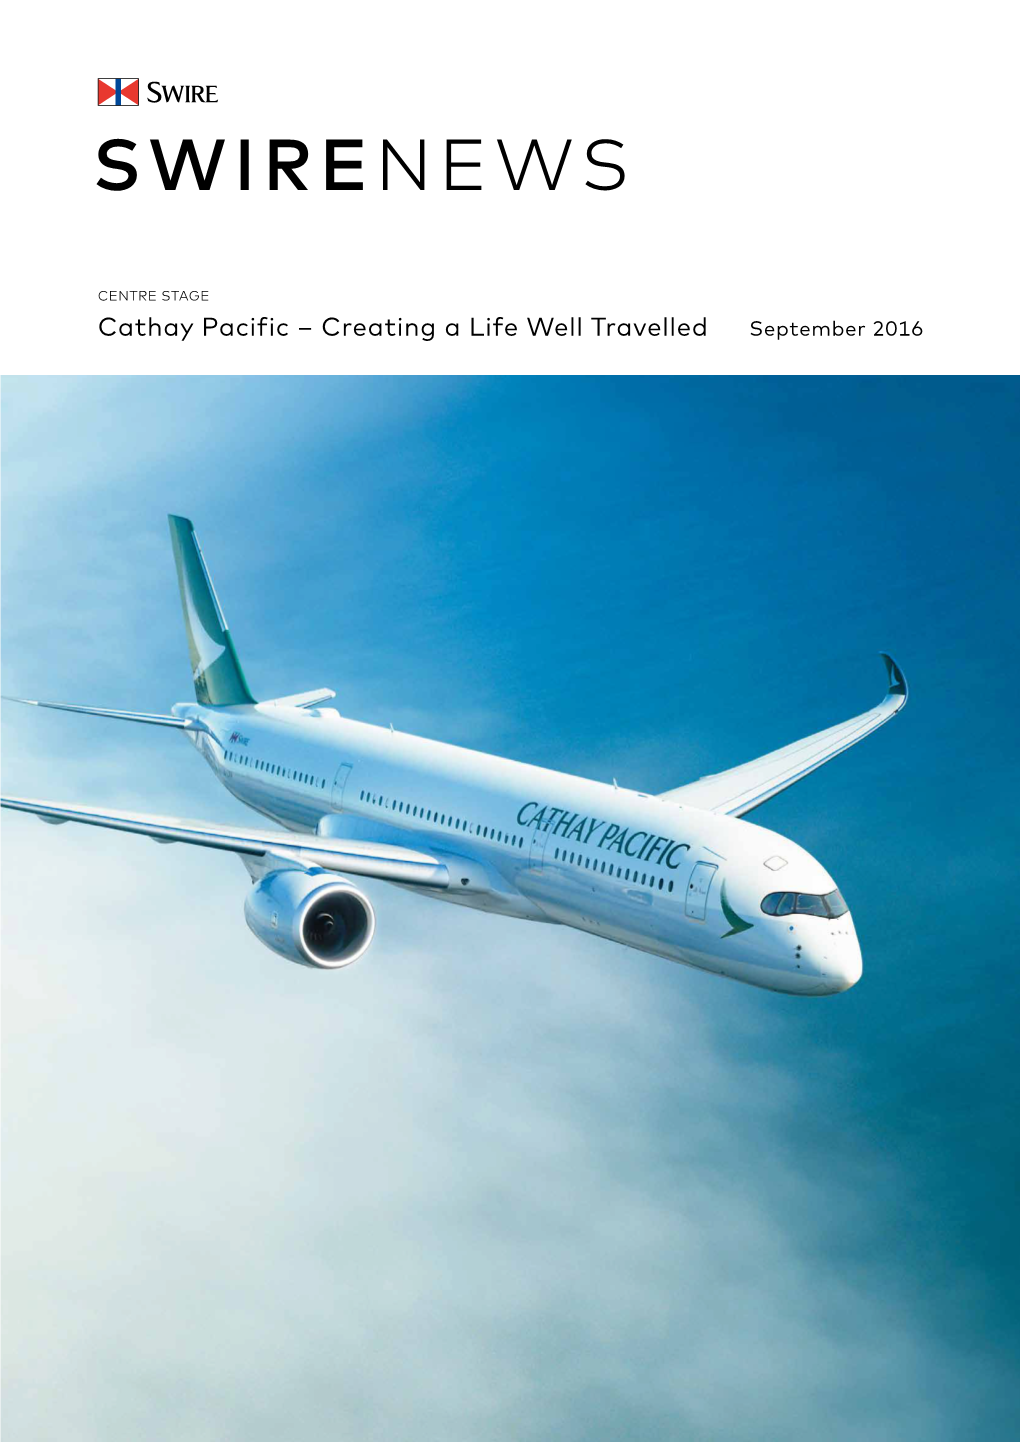 Cathay Pacific – Creating a Life Well Travelled September 2016 NEWSWIRE CORPORATE